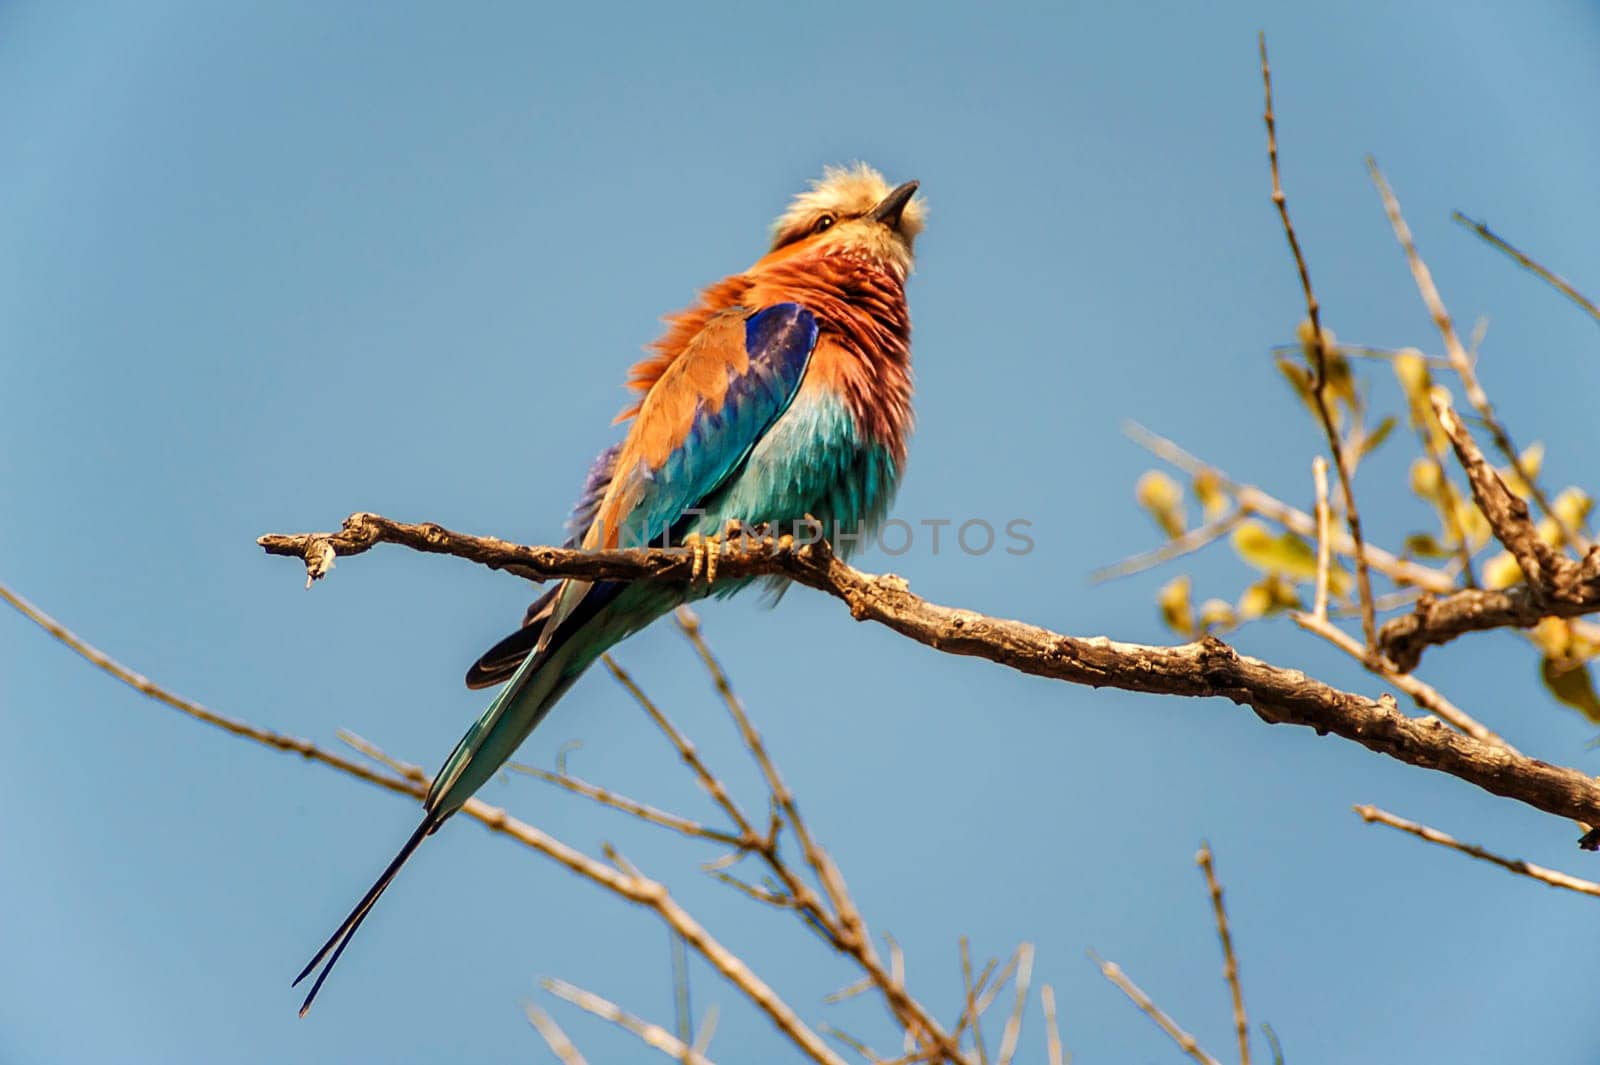 Lilacbreasted Roller (Coracias caudata) in Timbavati Nature Reserve, South Africa